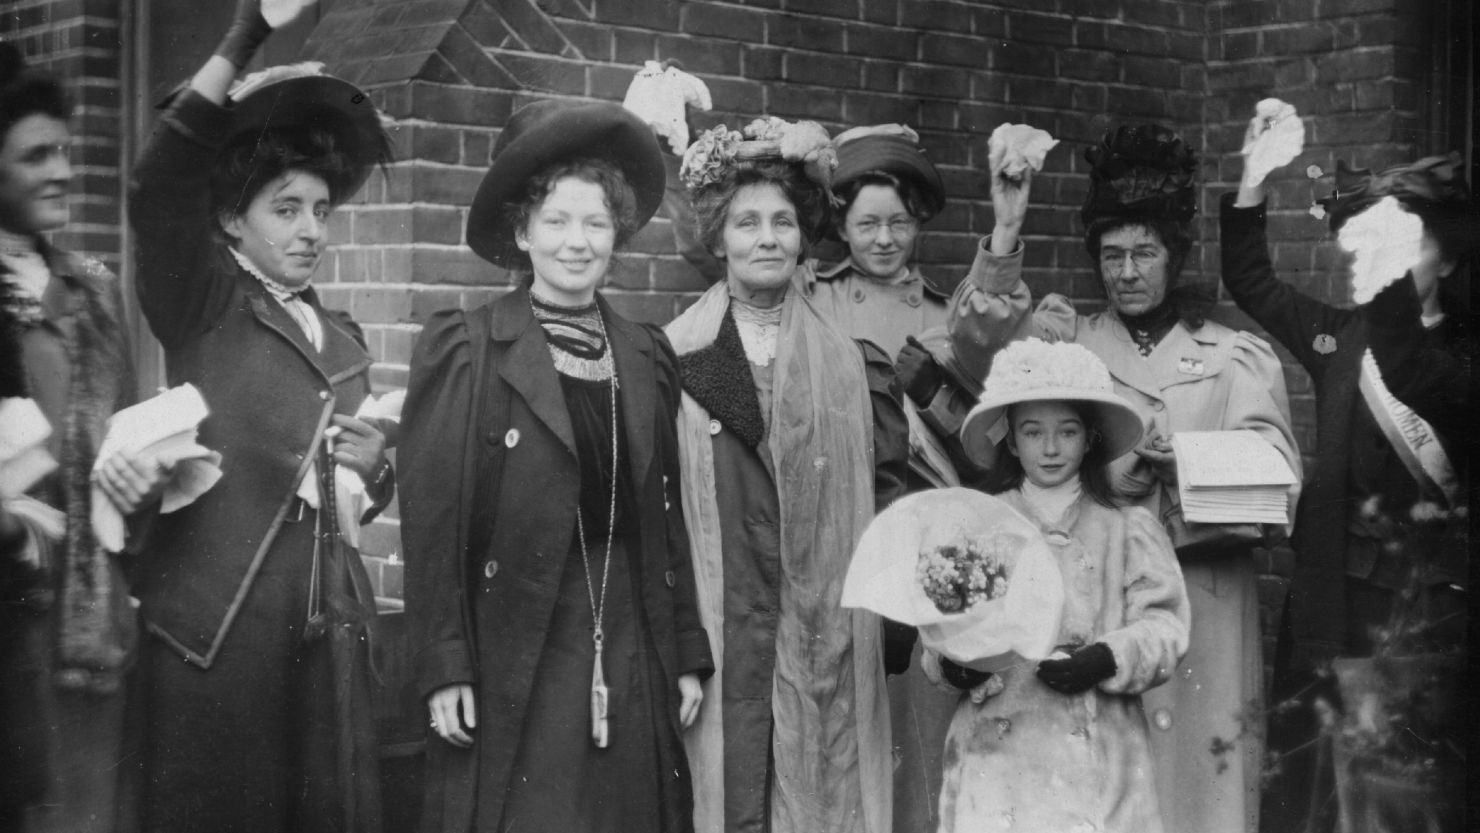 Suffragettes Emmeline Pankhurst (center) and her daughter Christabel Harriette (third from left), are welcomed by friends and supporters upon their release from prison in 1908.